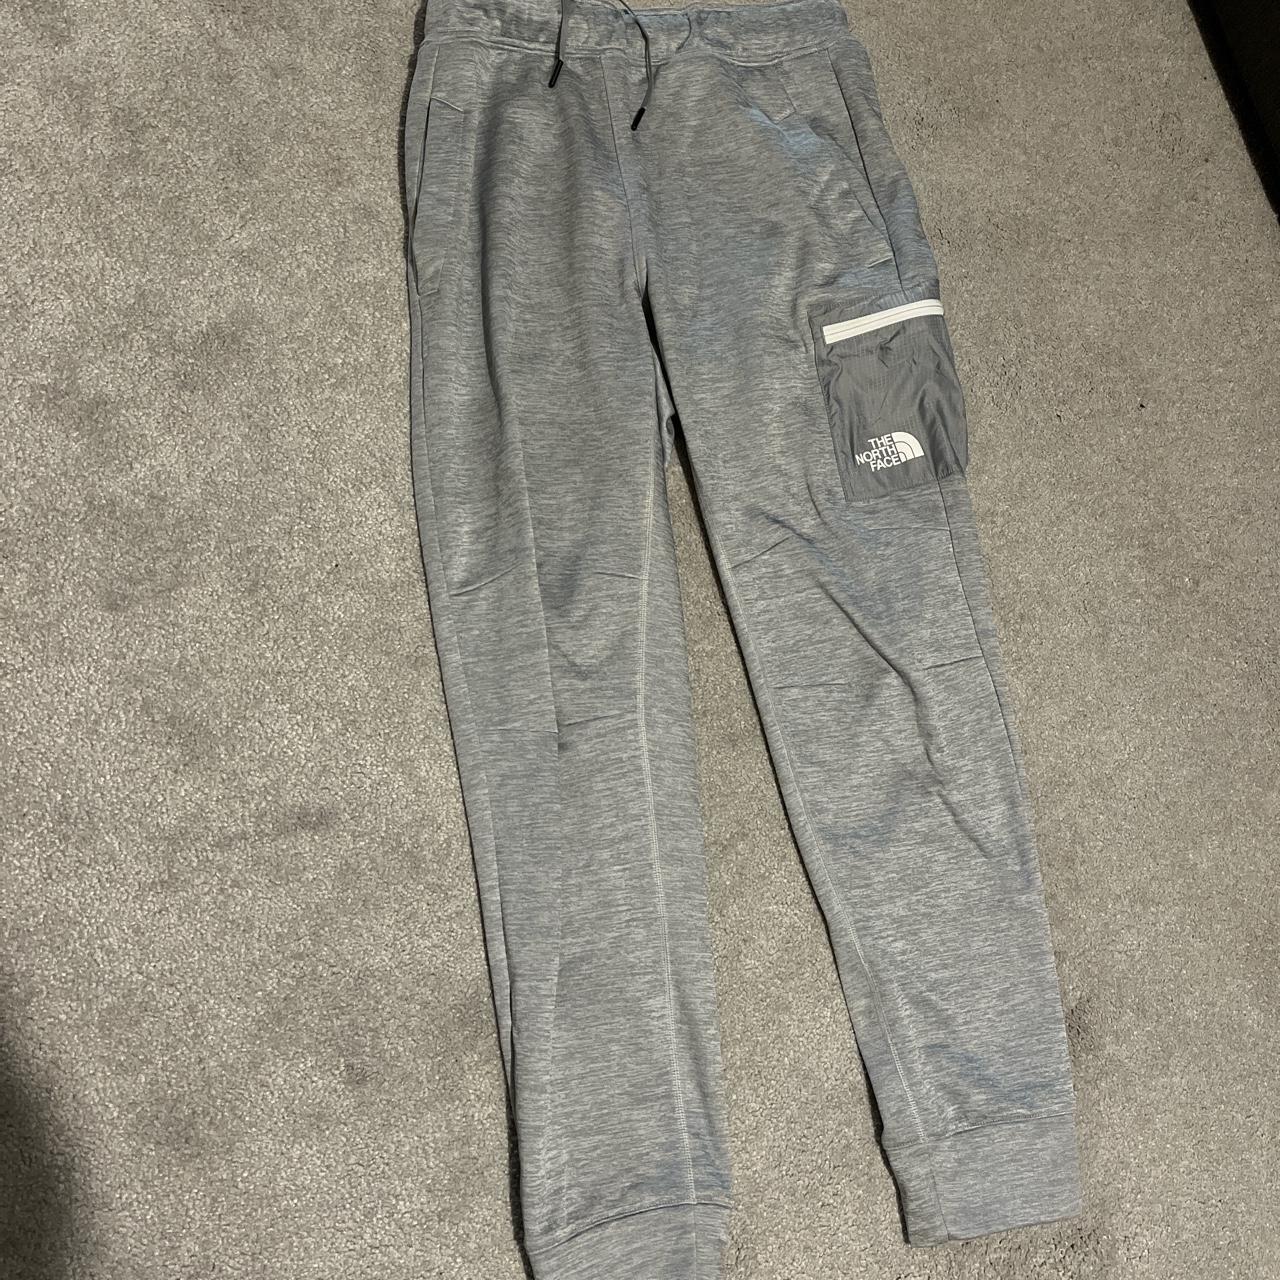 The North Face Men's Grey and Black Joggers-tracksuits | Depop